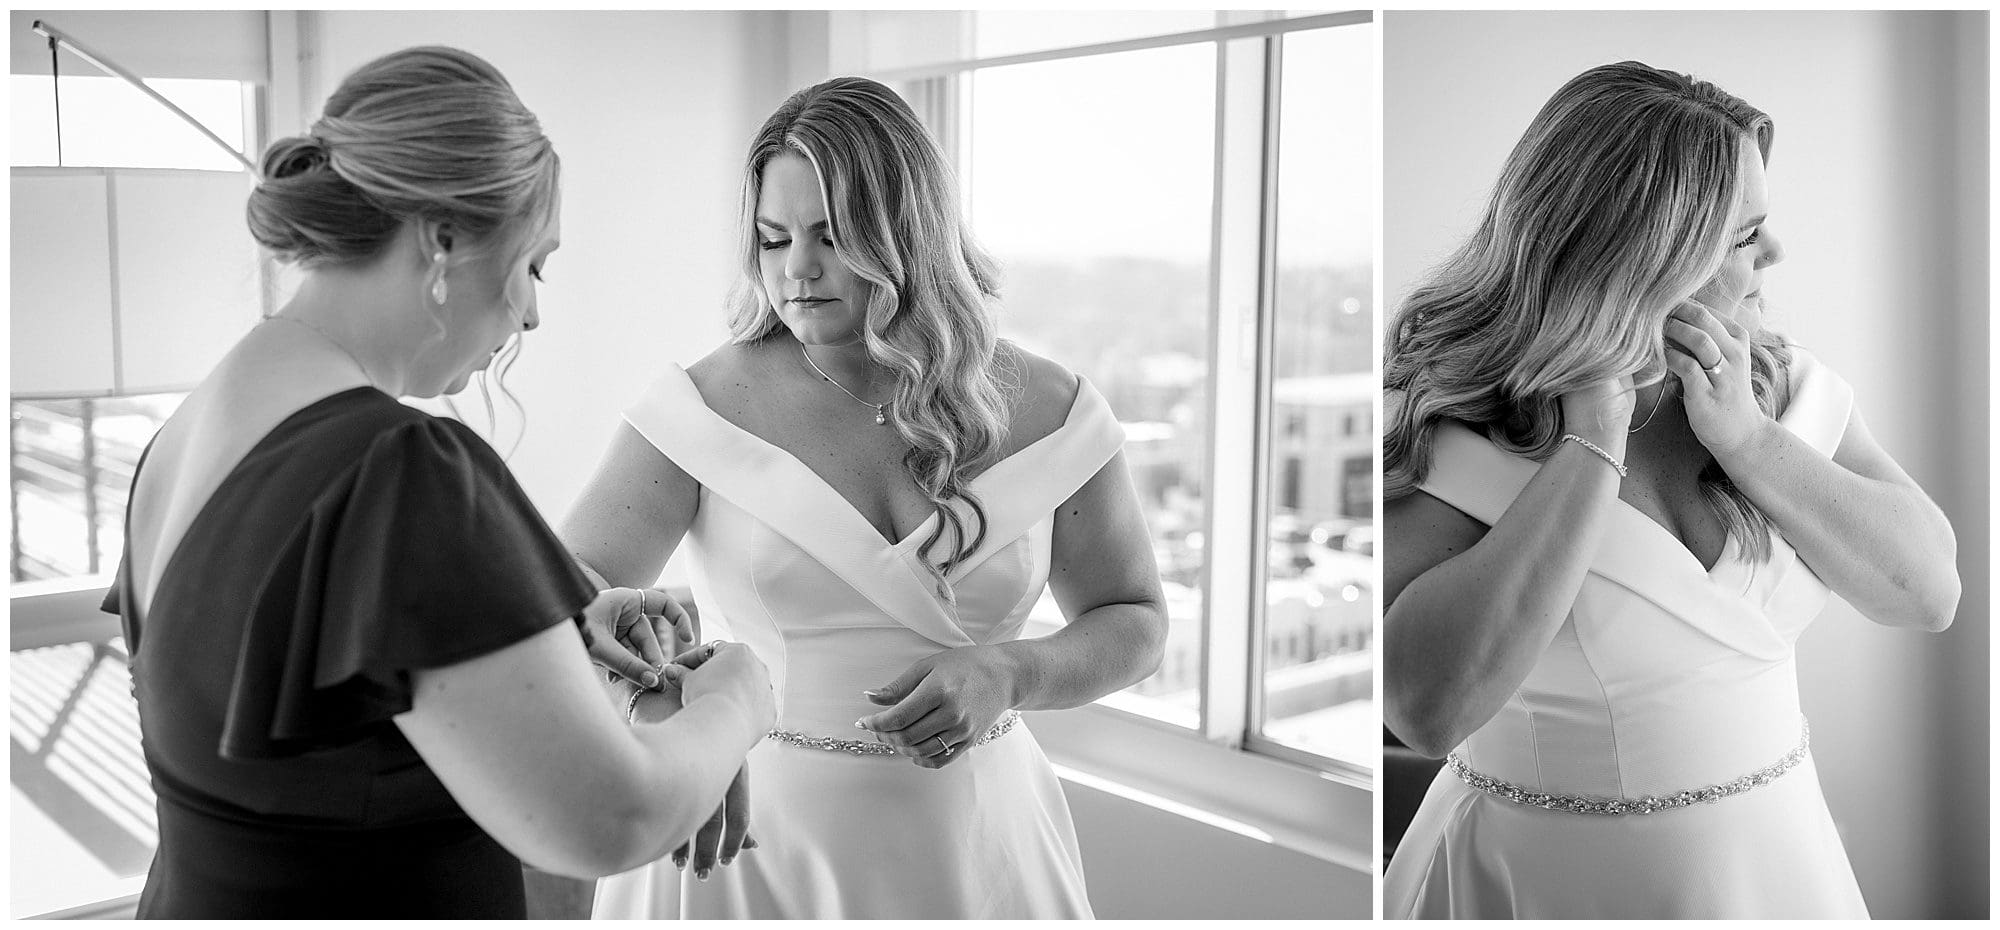 Black and white photos of a bride getting ready for her wedding.